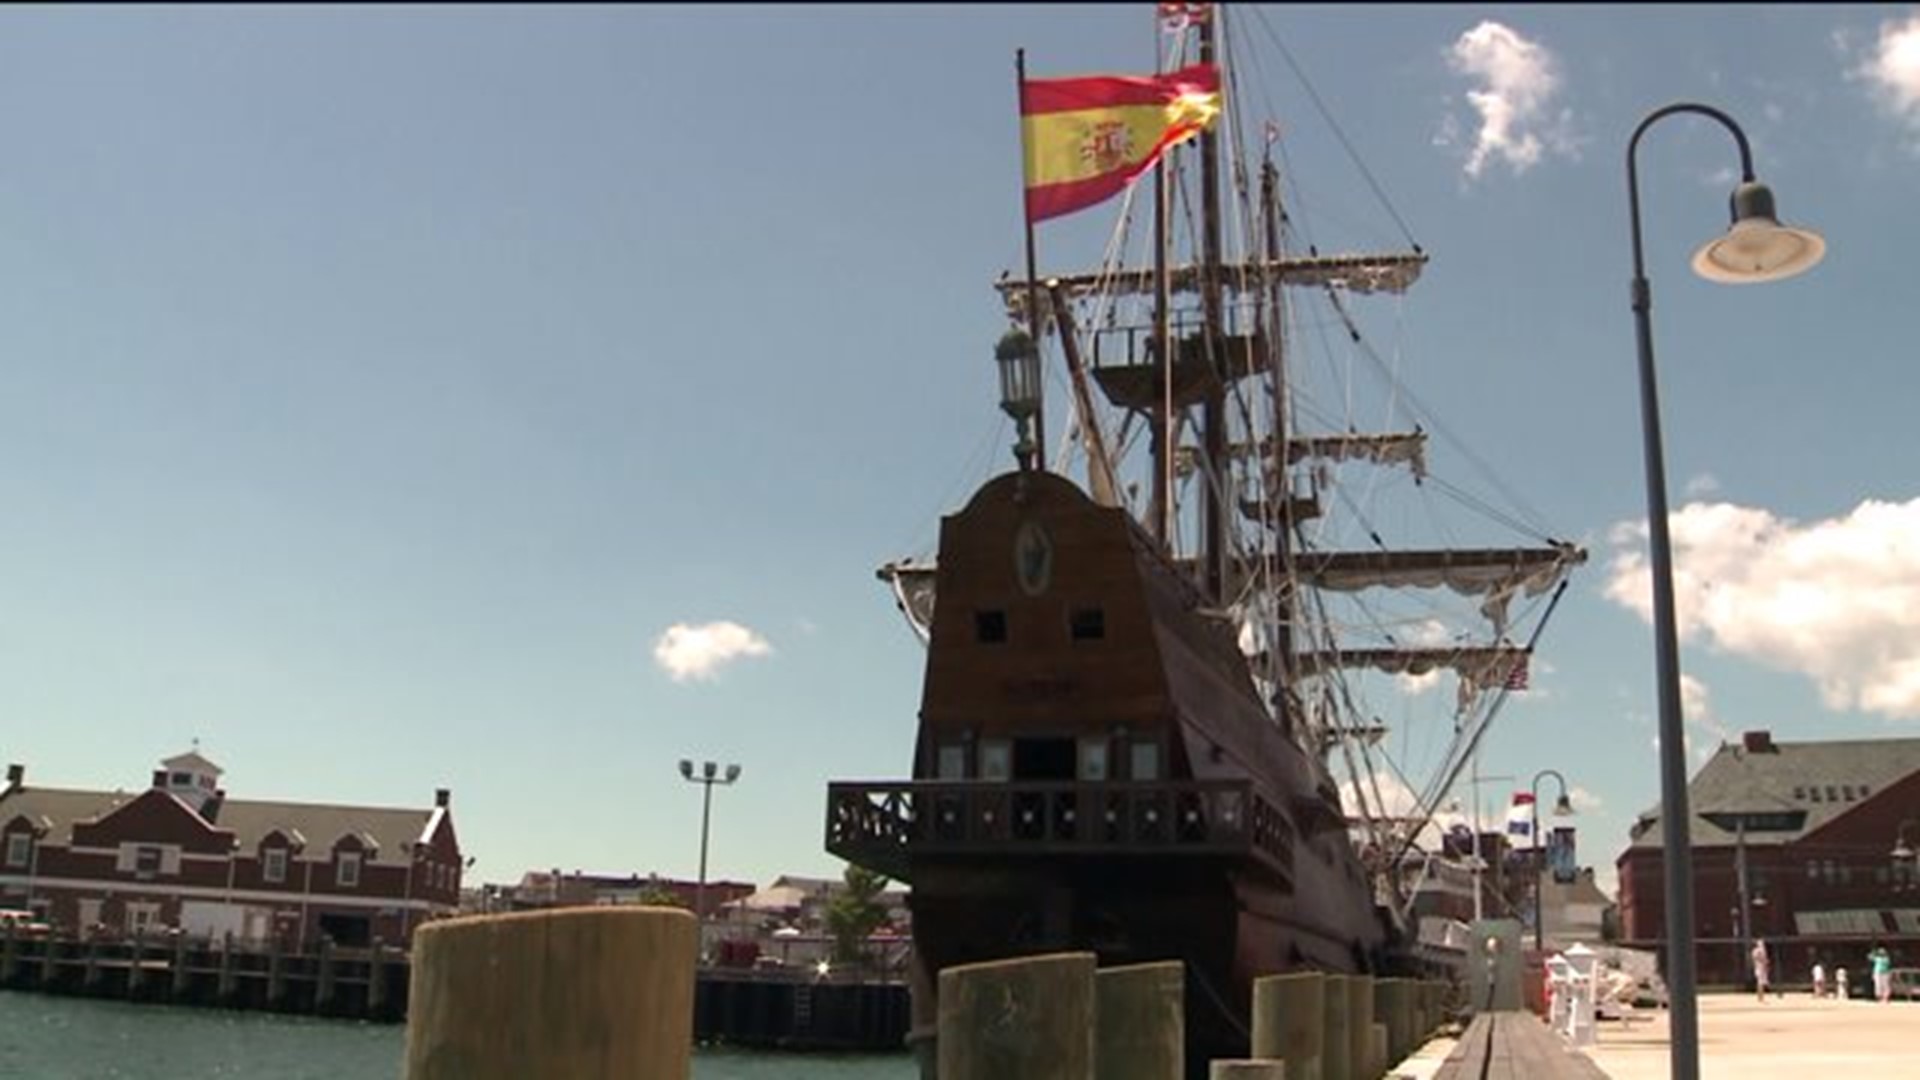 18th century gold, silver, spices ship from Spain docks in New London